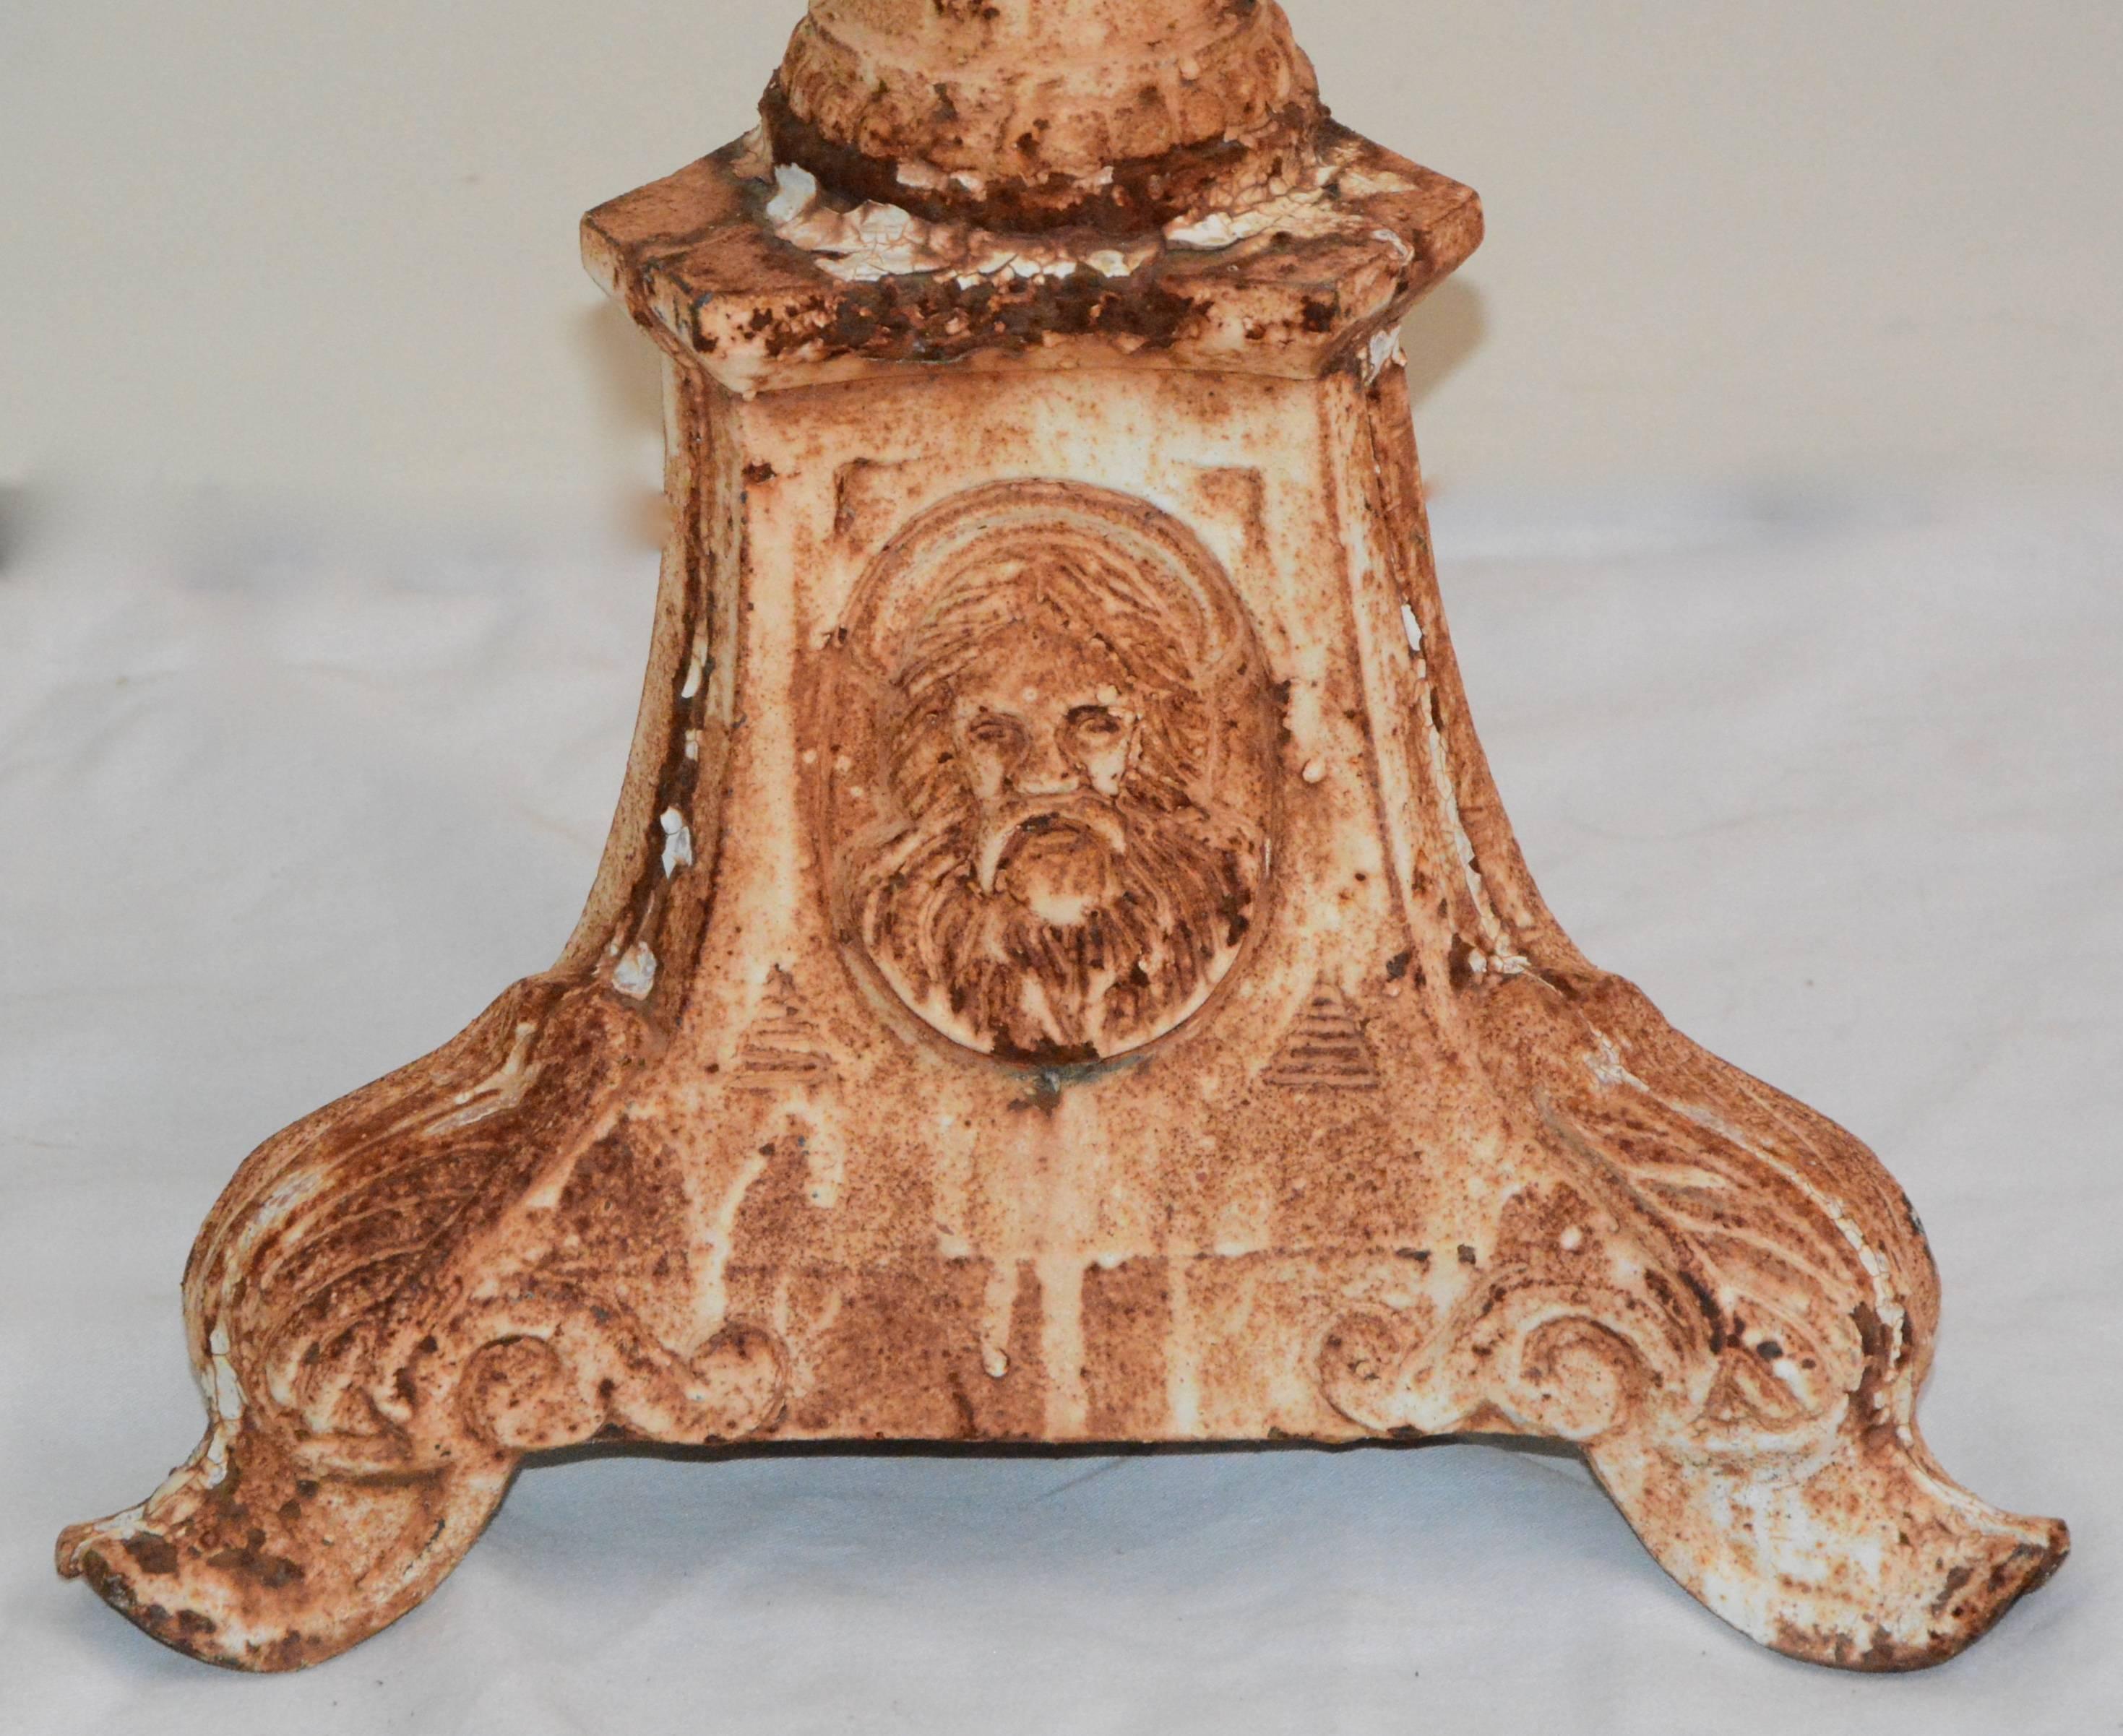 This is a substantial pair of cast iron candleholders. Each piece has a cast iron frame with white painted finish; featuring a single sconce with reeded detailing down the stem, a large base with an assortment of iconography vignettes to the sides